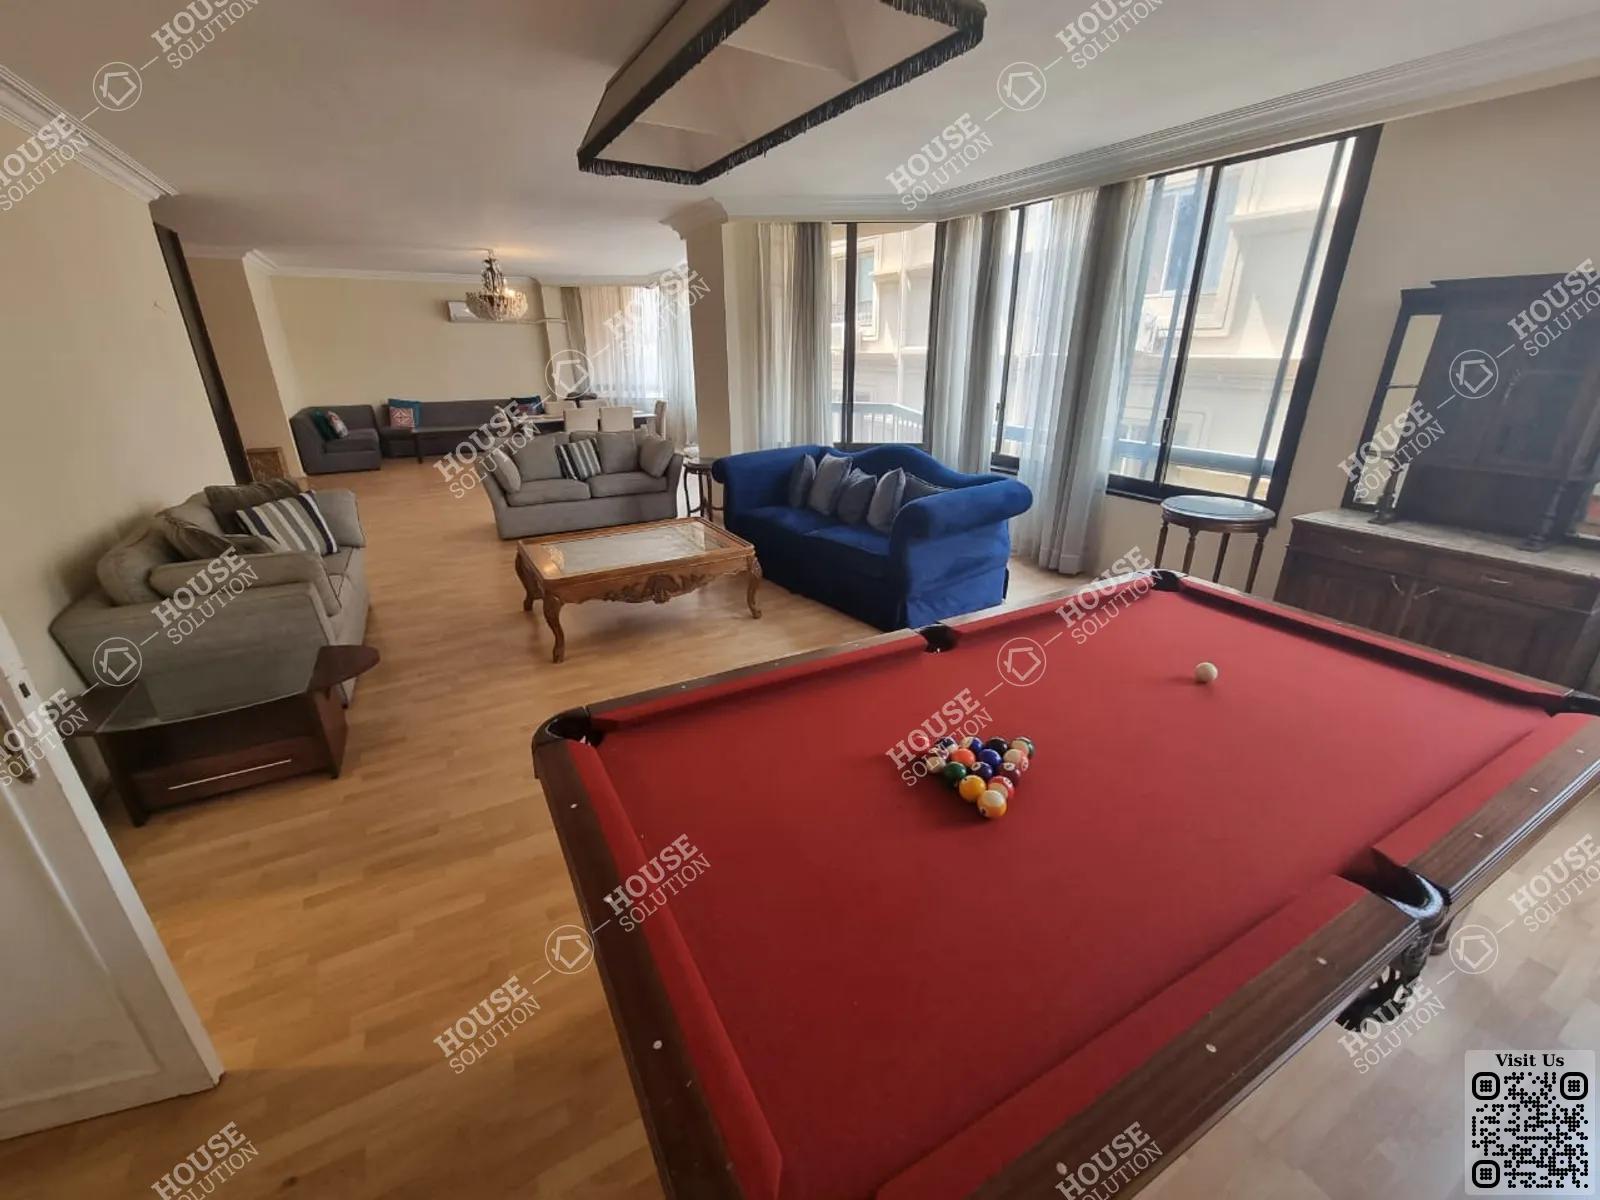 RECEPTION  @ Apartments For Rent In Maadi Maadi Sarayat Area: 320 m² consists of 4 Bedrooms 3 Bathrooms Modern furnished 5 stars #4577-0